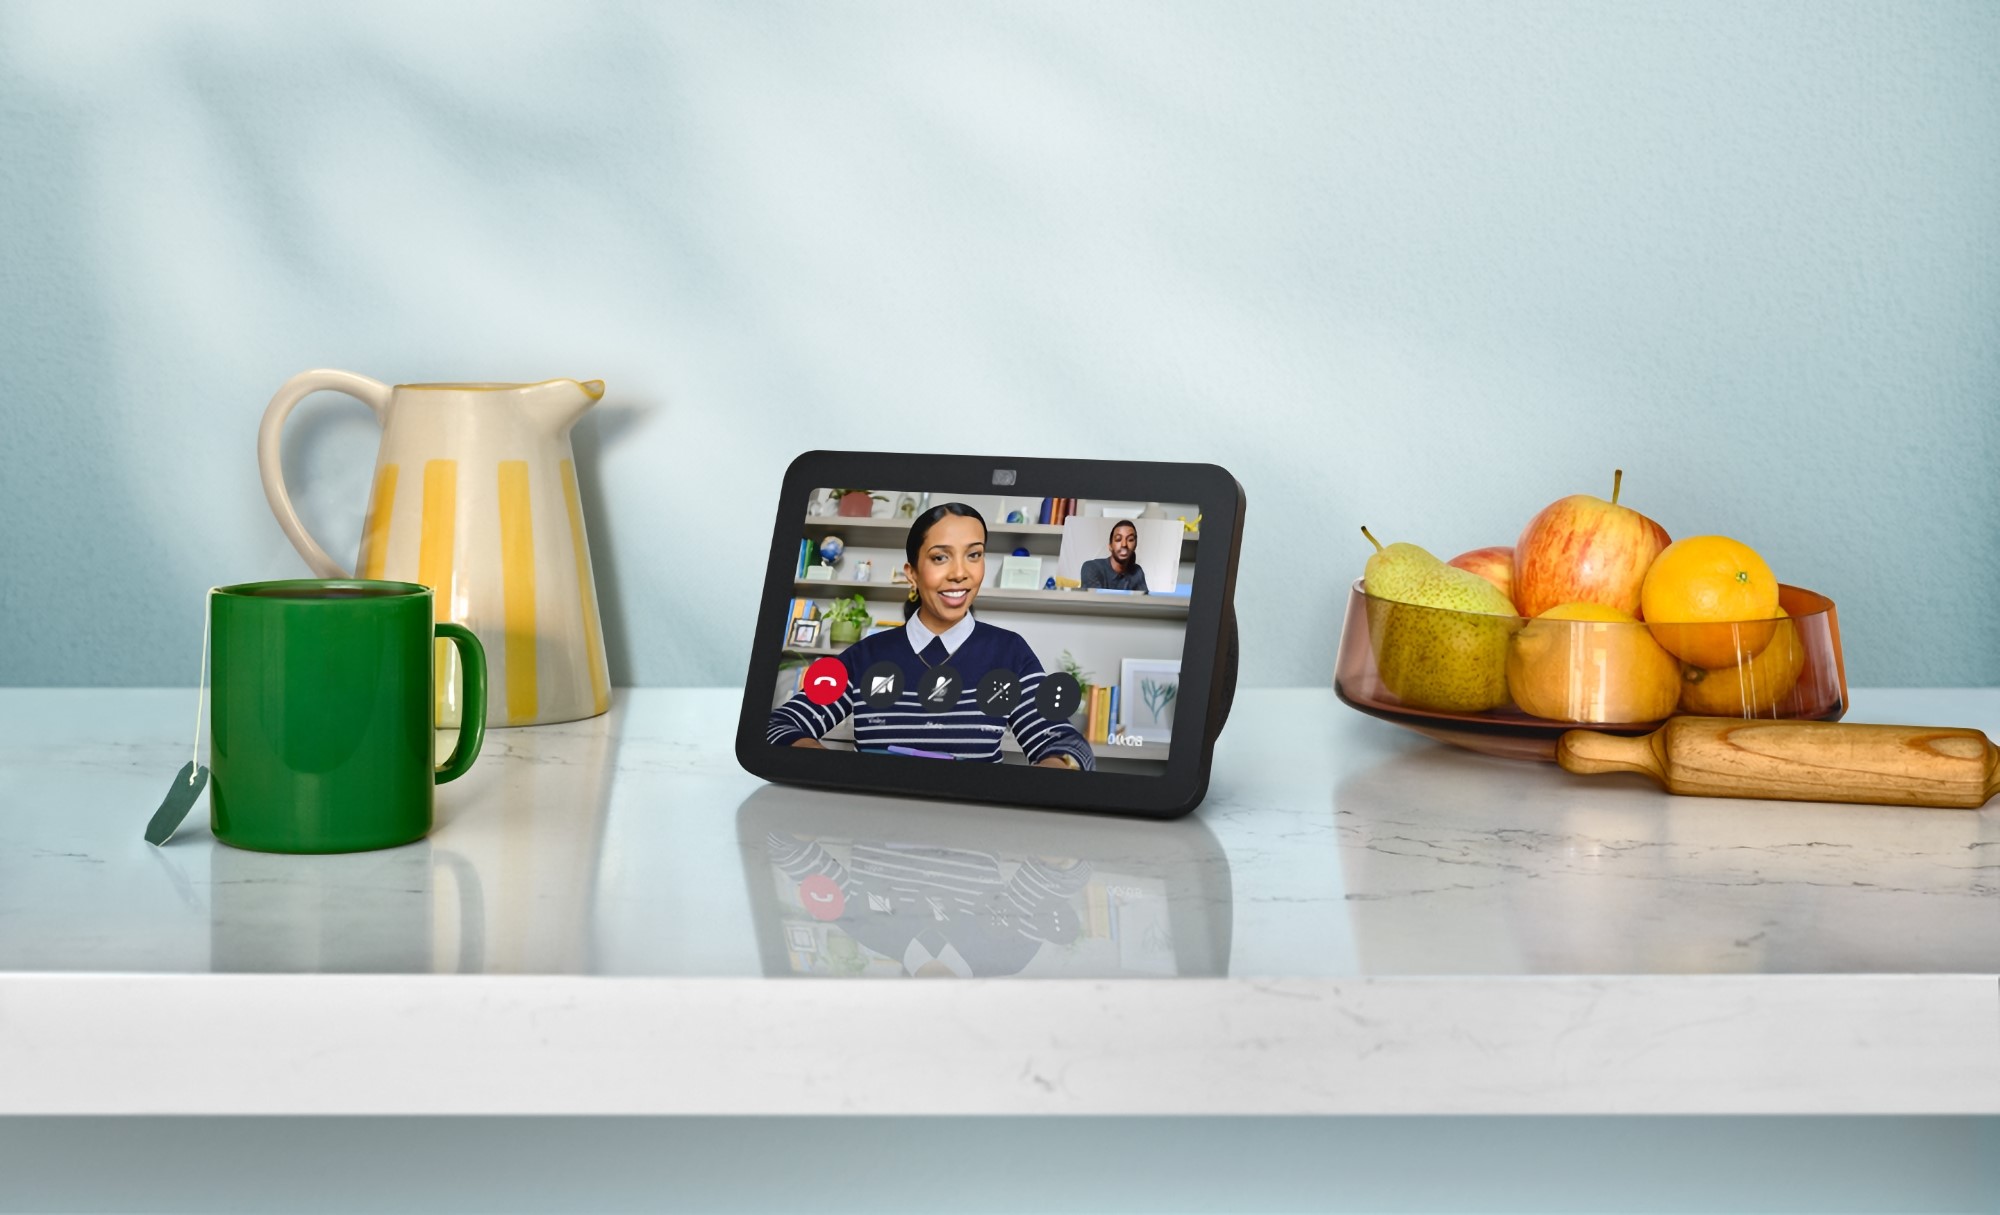 Amazon product photo of an updated Echo Show 8 smart speaker / display. It sits on a luxurious kitchen counter next to a mug, tea pot, and fruit basket. On its screen is a person smiling in a video chat. | DeviceDaily.com